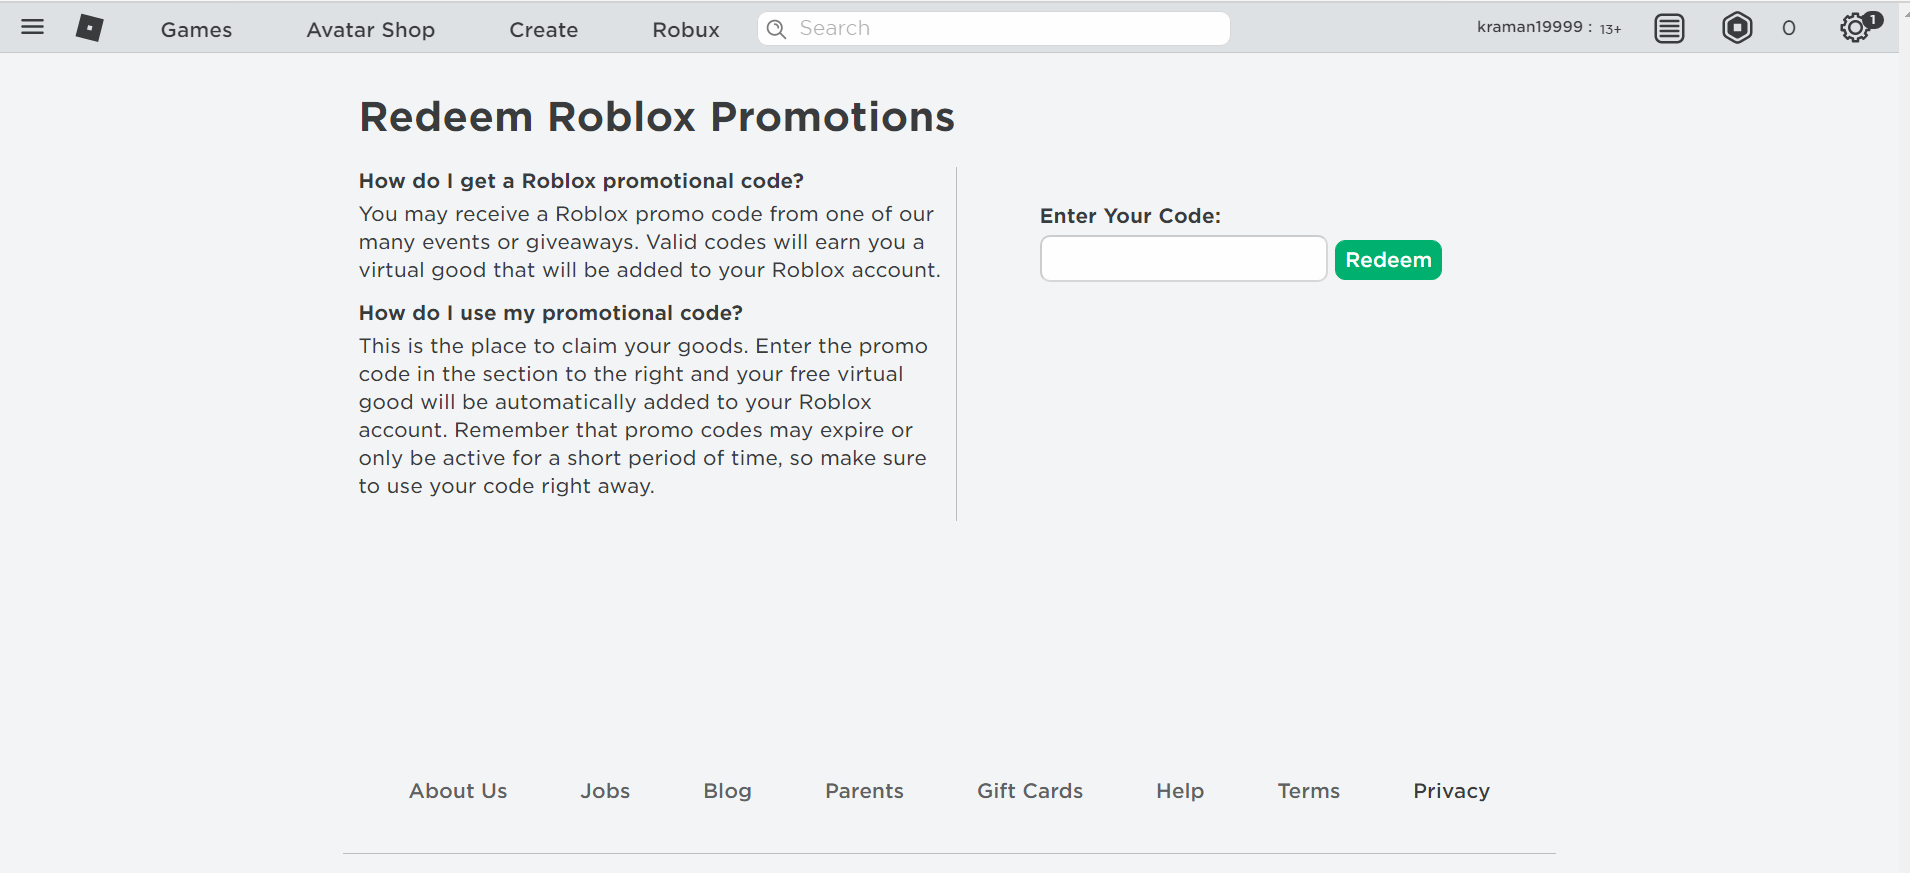 Roblox Promo code. Redeem Roblox codes. Redeem Roblox promotions. Redeem Roblox promocodes. Please enter the code you received